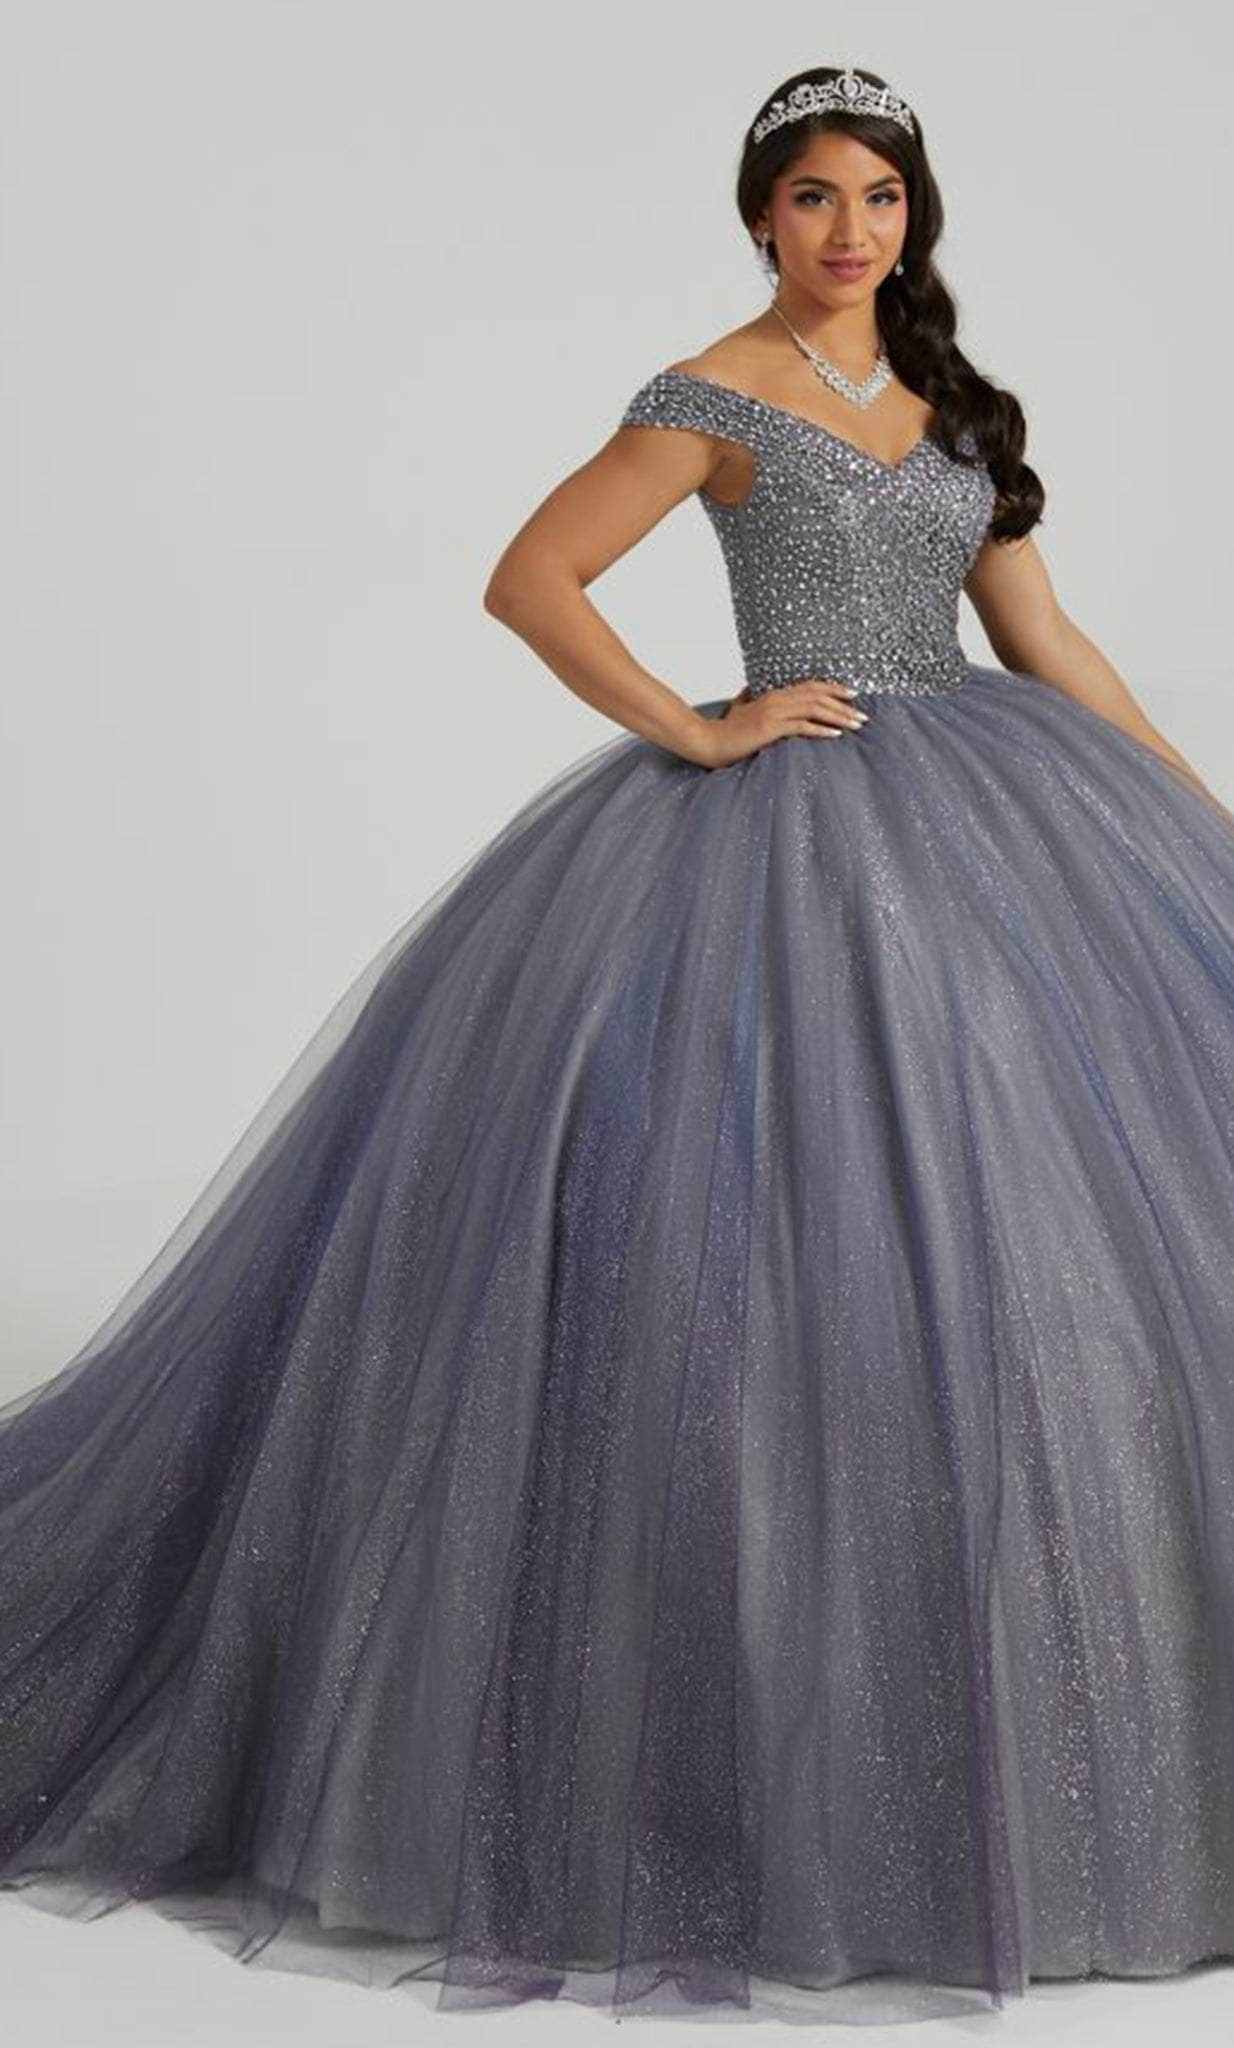 Image of Fiesta Gowns 56475 - Ombre-Designed Rhinestone Dress